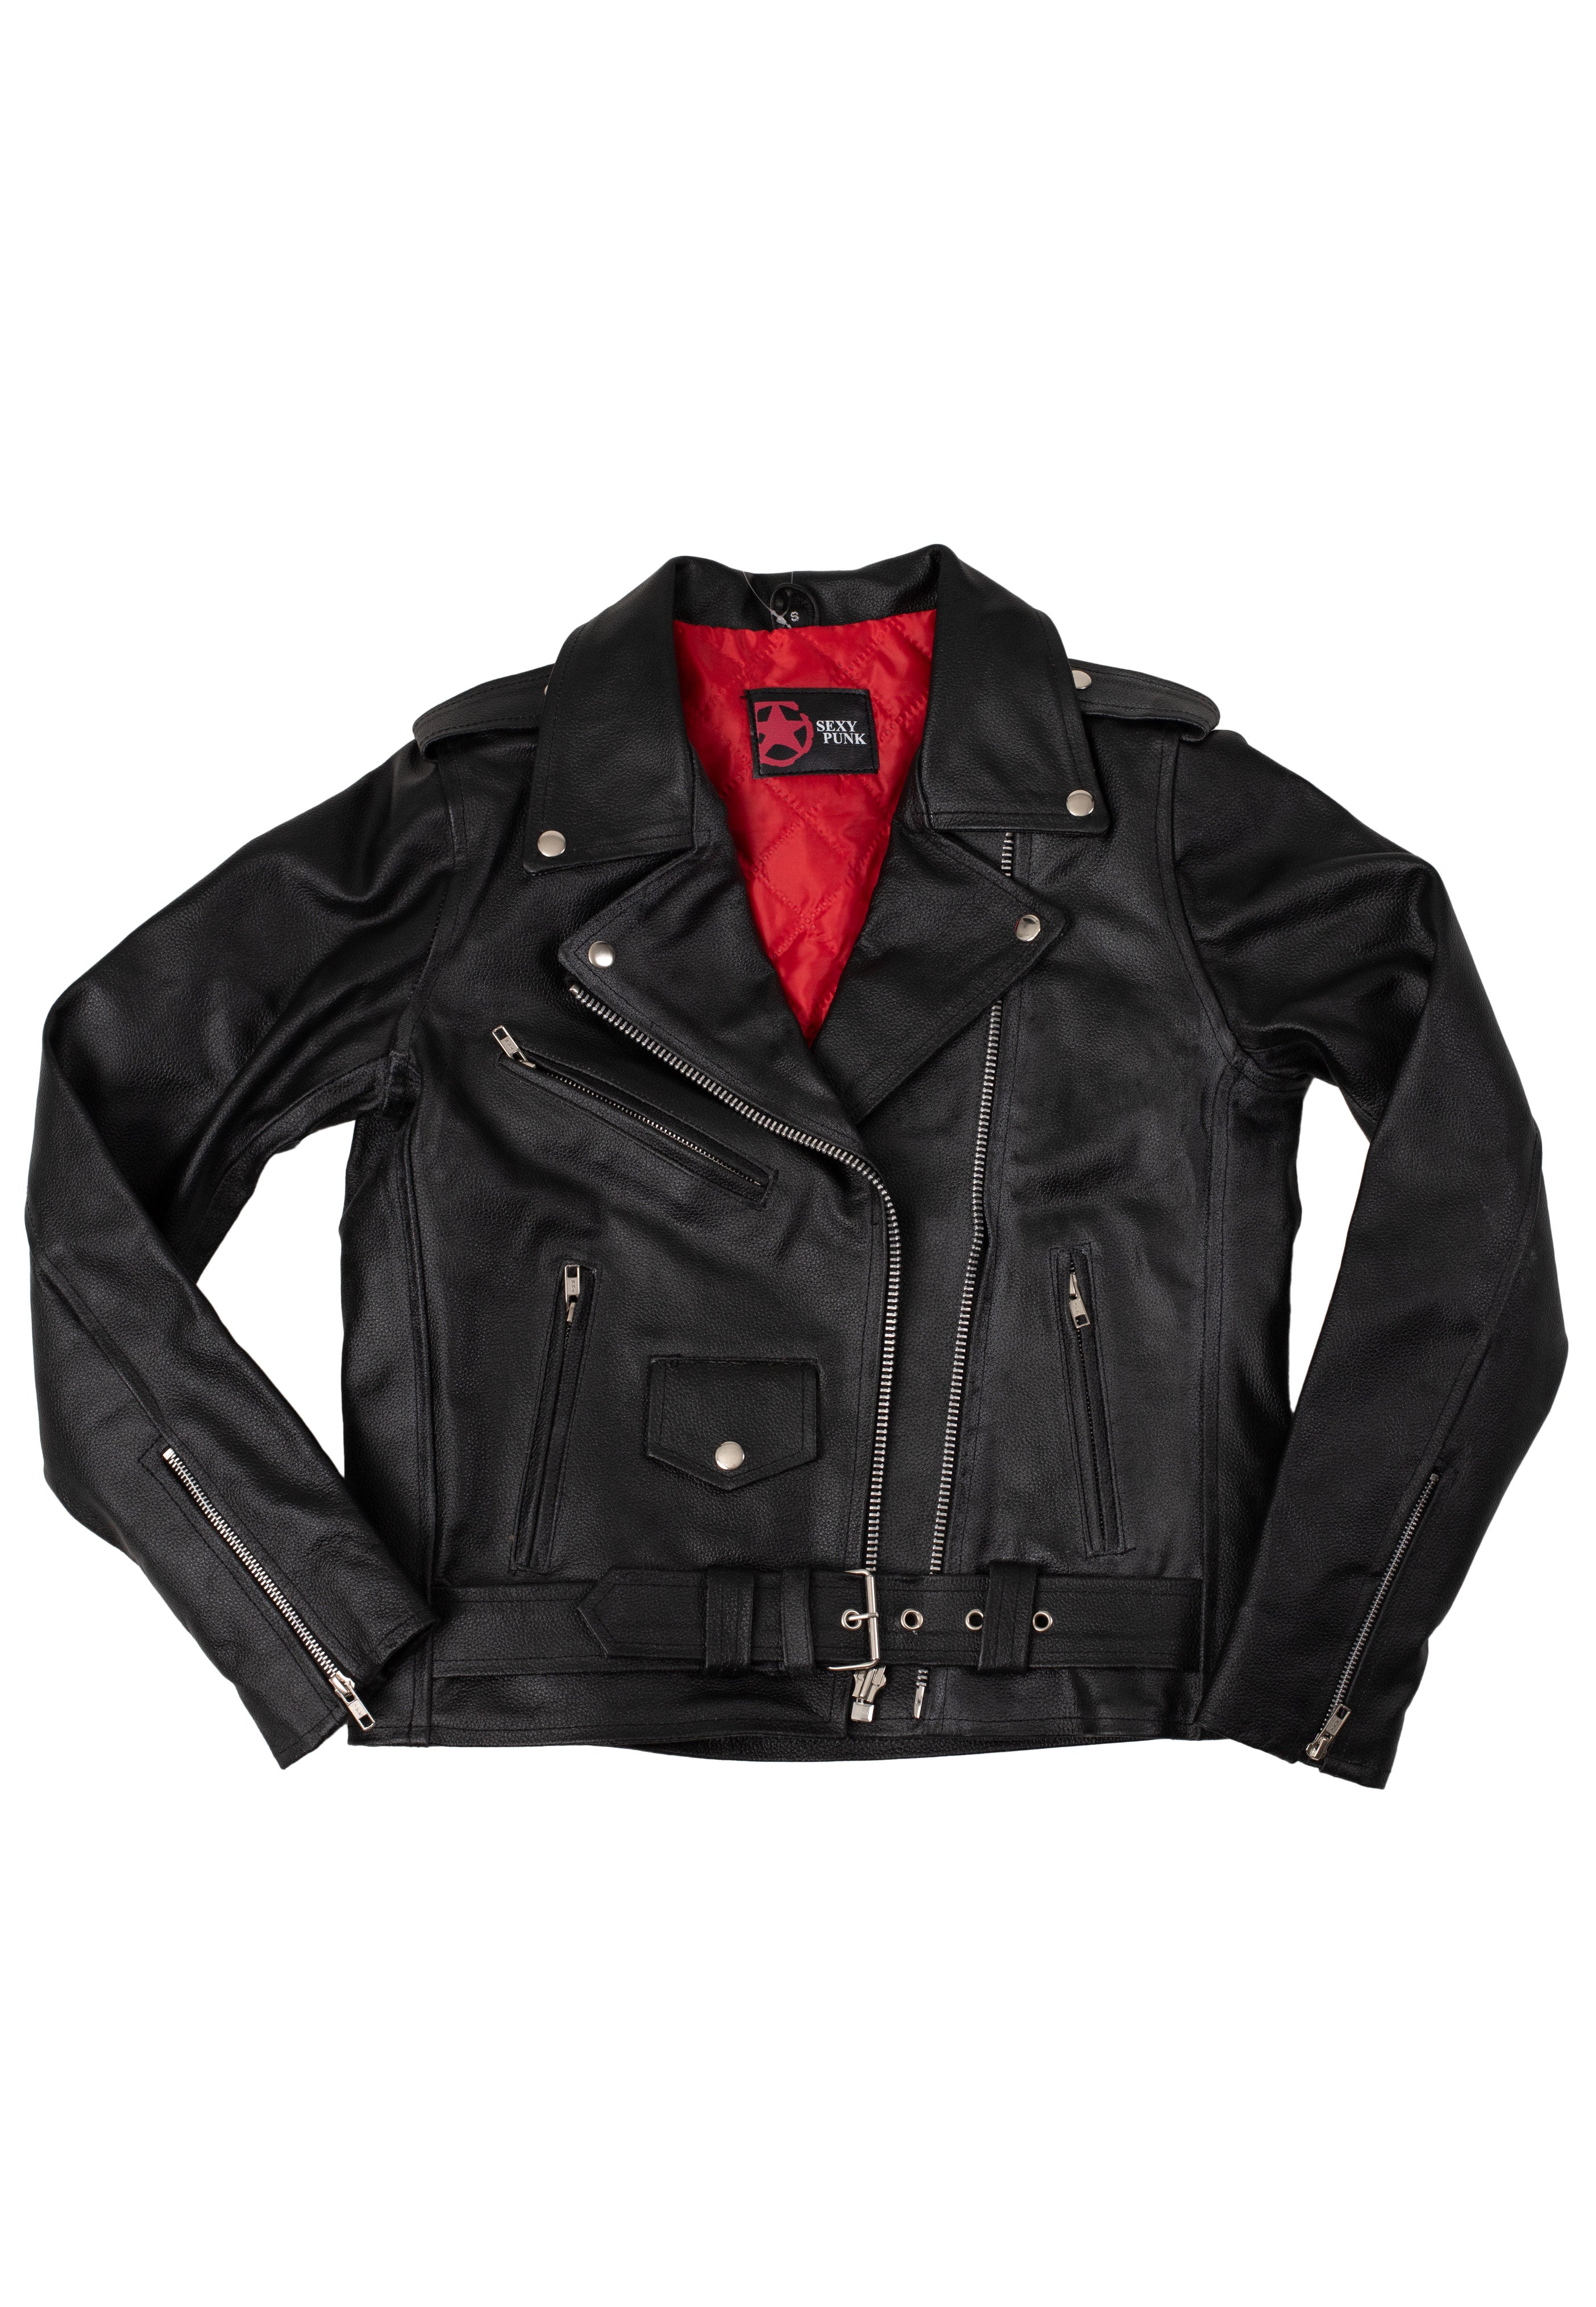 SexyPunk - Girlie Classic Biker Style - Leather Jacket